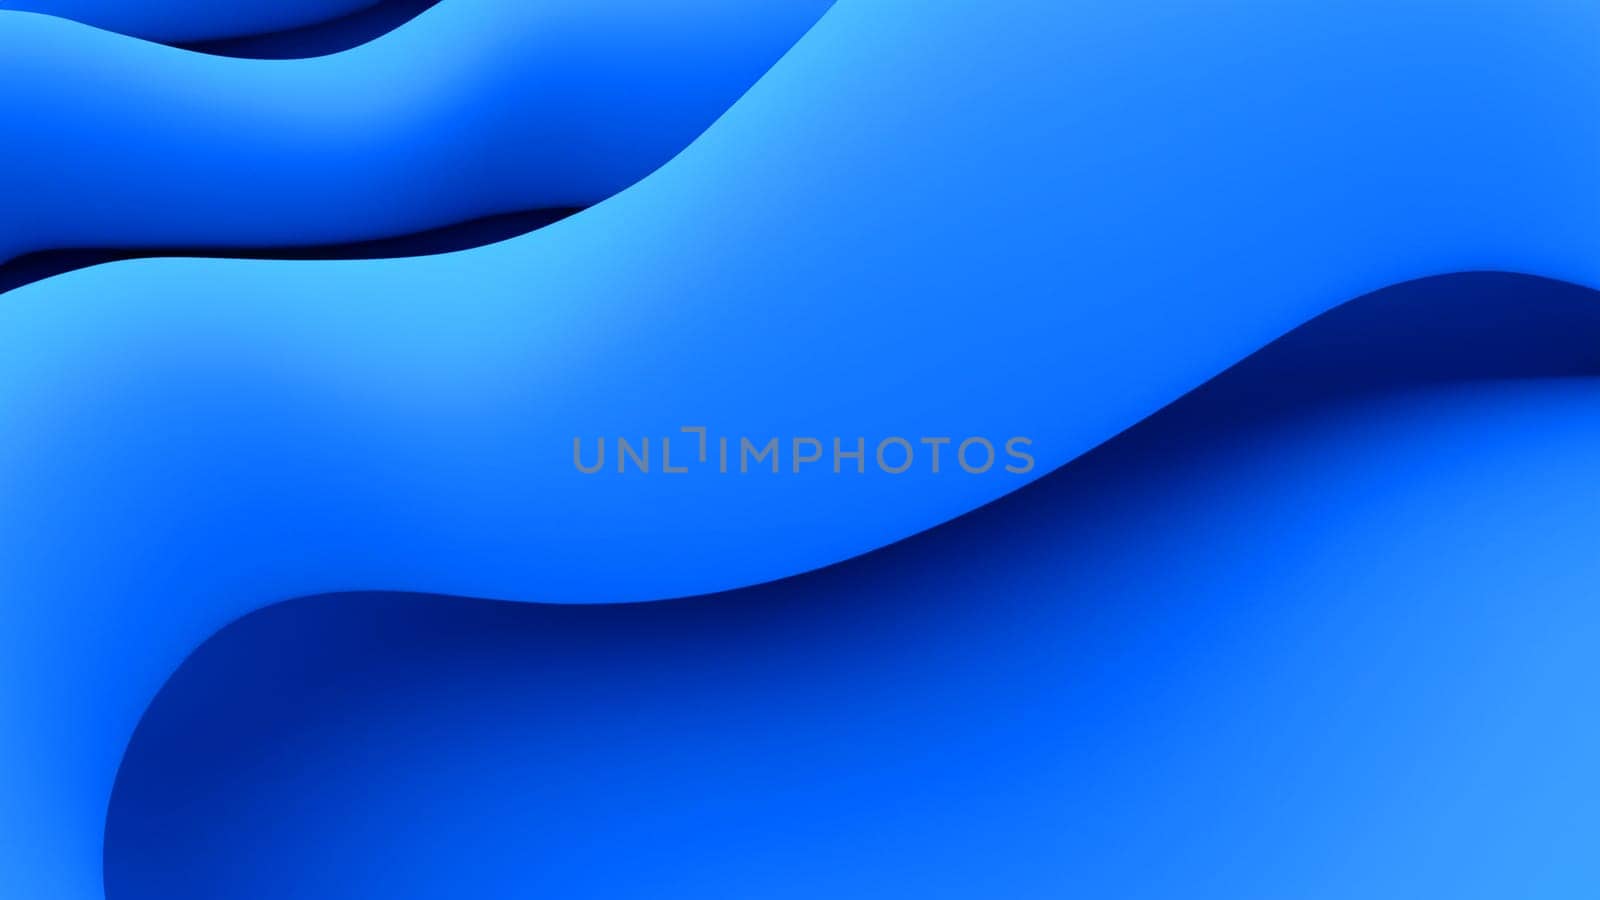 Abstract blue background with wavy lines and shadows. 3d rendering